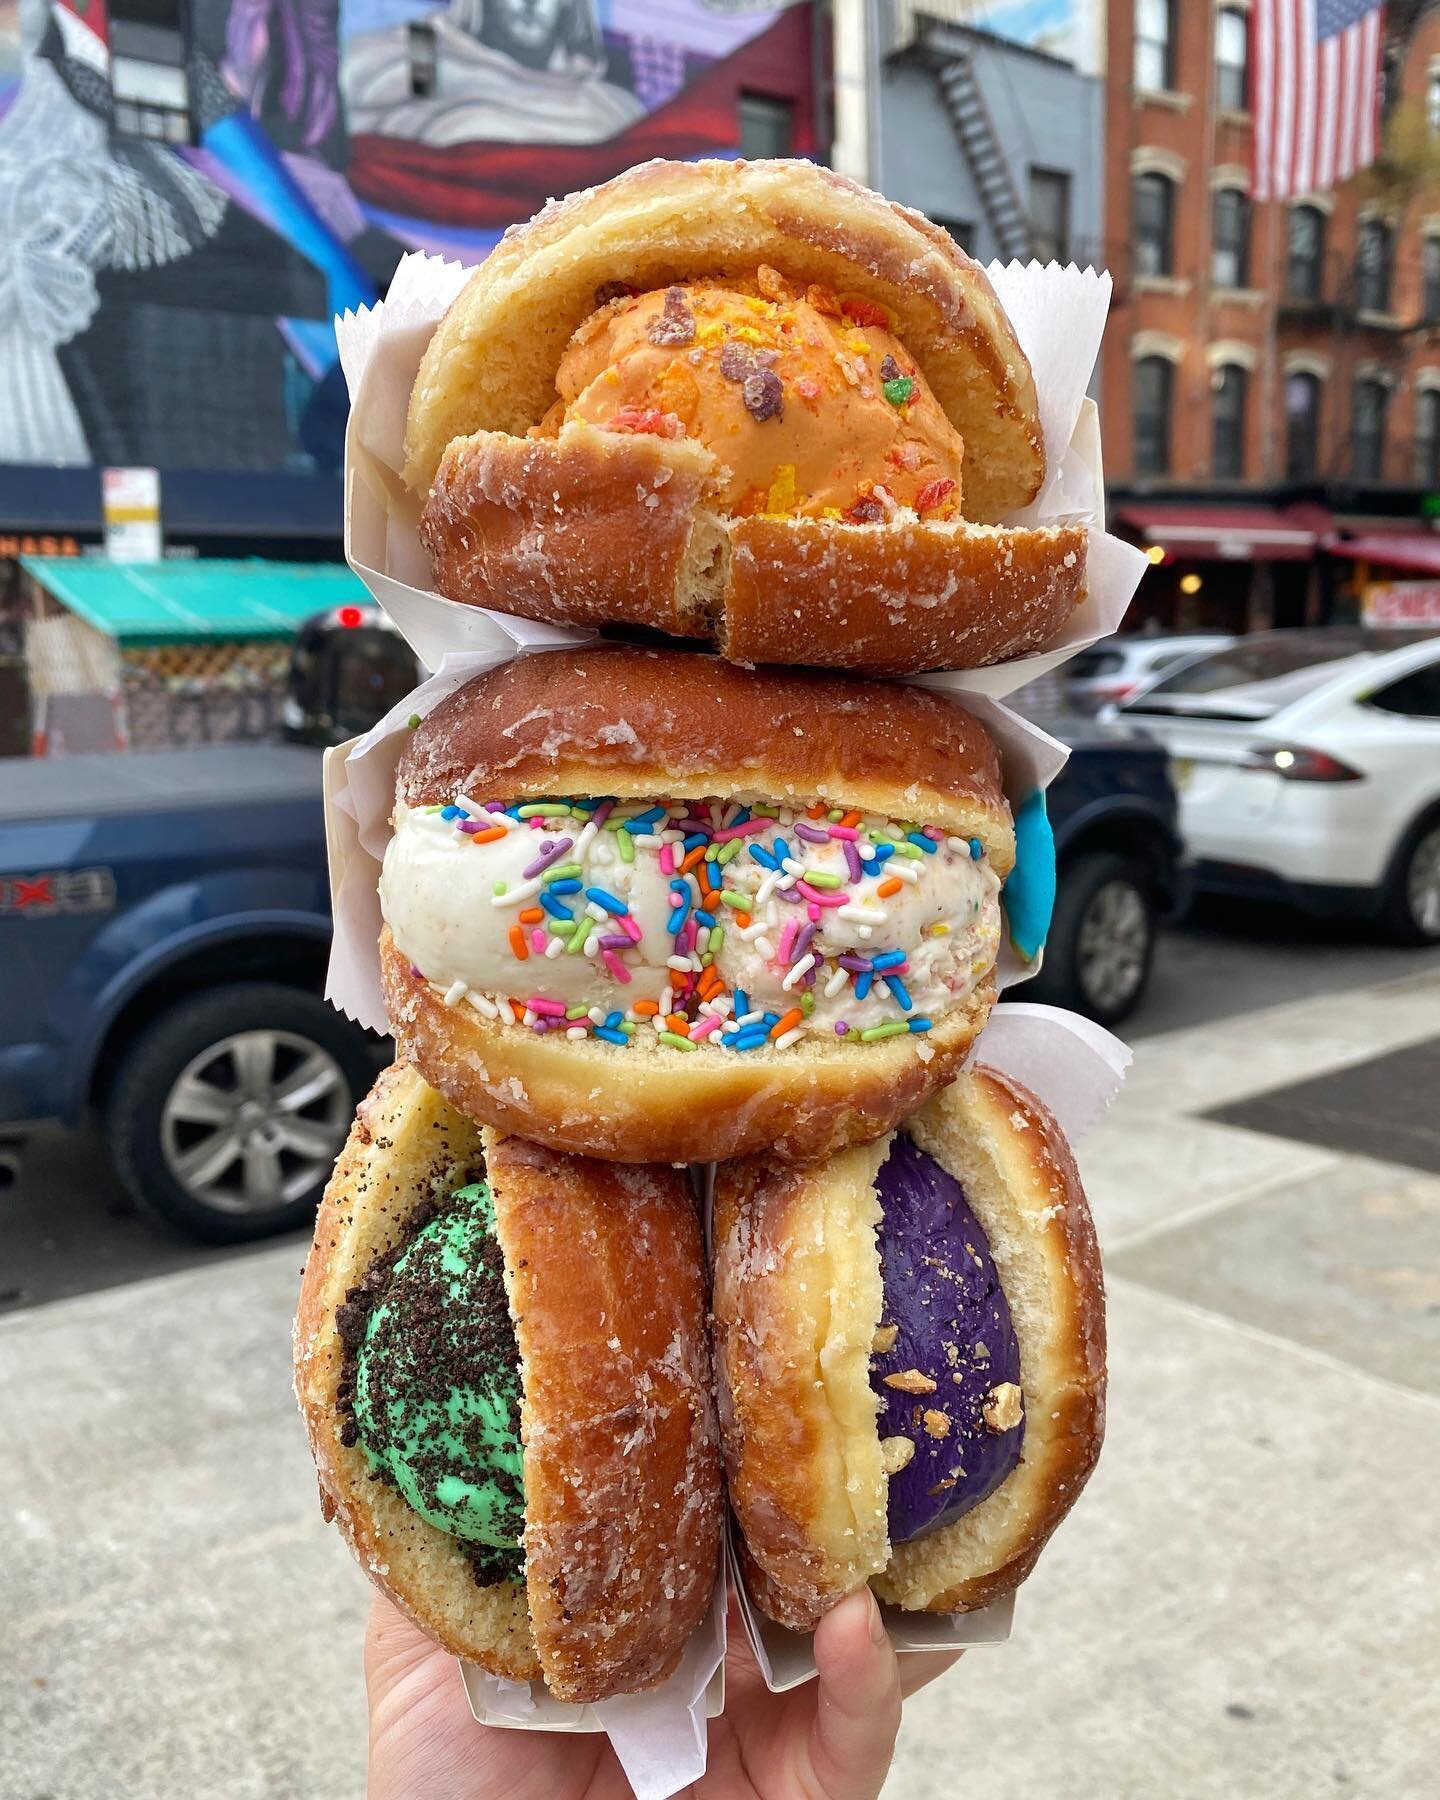 How many can you hold with one hand? 😳
.
.
.

#stuffedicecream #Stuffed #Cruffs #icecreamcakes #donuticecreamsandwich #food #donuts #icecream #nyc #nycvibes #foodporn #sweets #date #dessert #stuffedbouquet #bouquet #heresmyfood #yougottaeatthis #buz